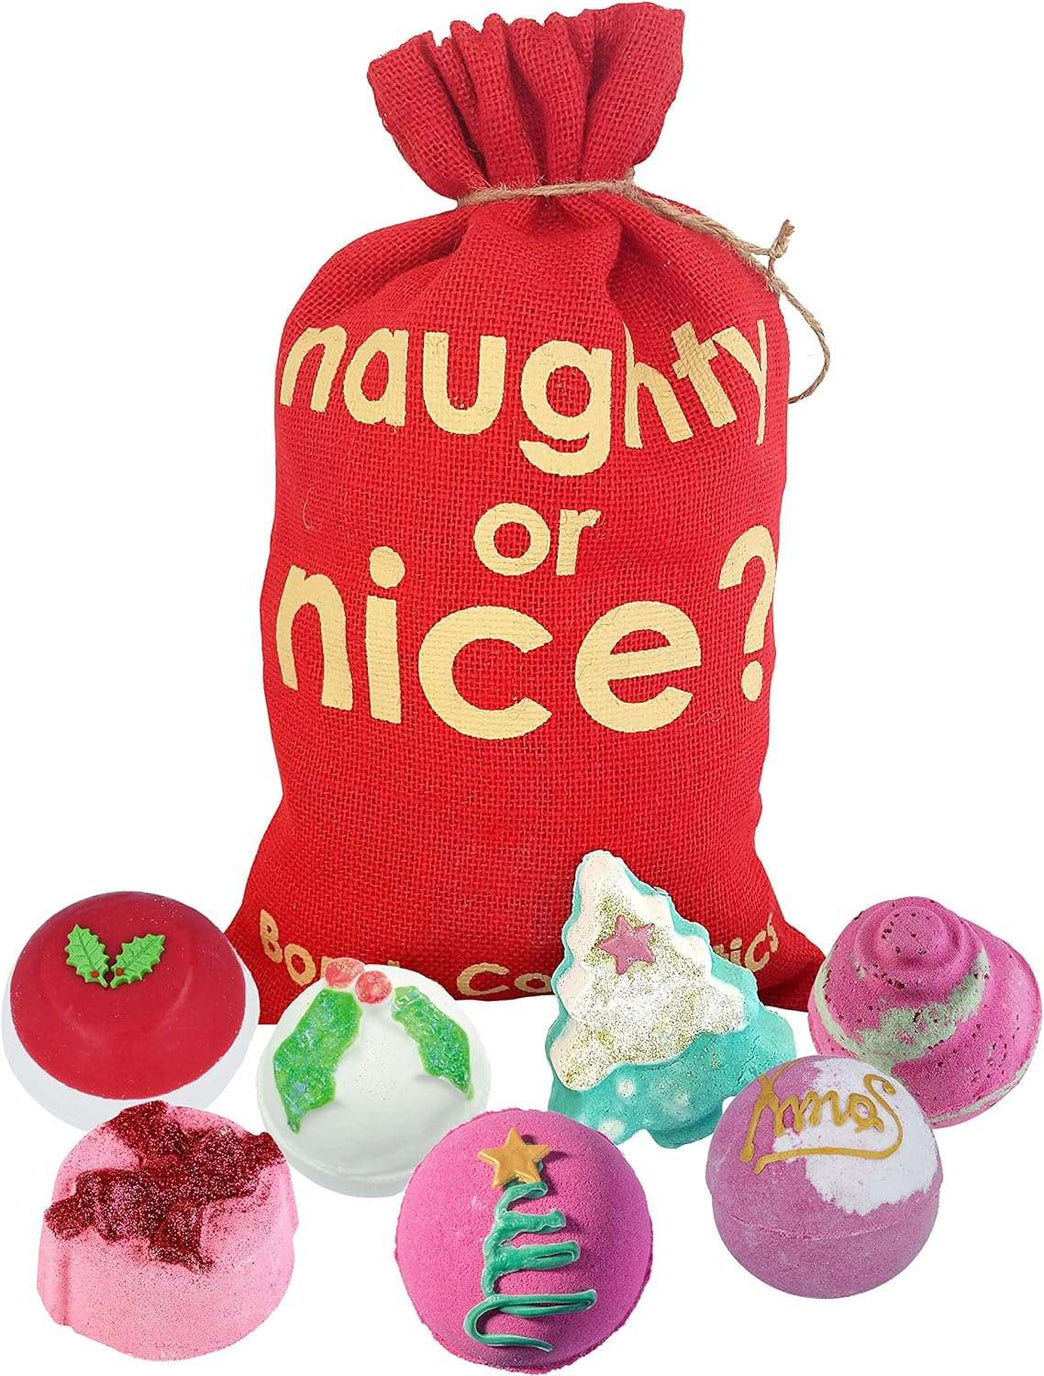 Bomb Cosmetics Naughty or Nice Handmade Hessian Sack Bath Blaster Gift Pack, Contains 7-Piece, 160 g Each (Contents May Vary)